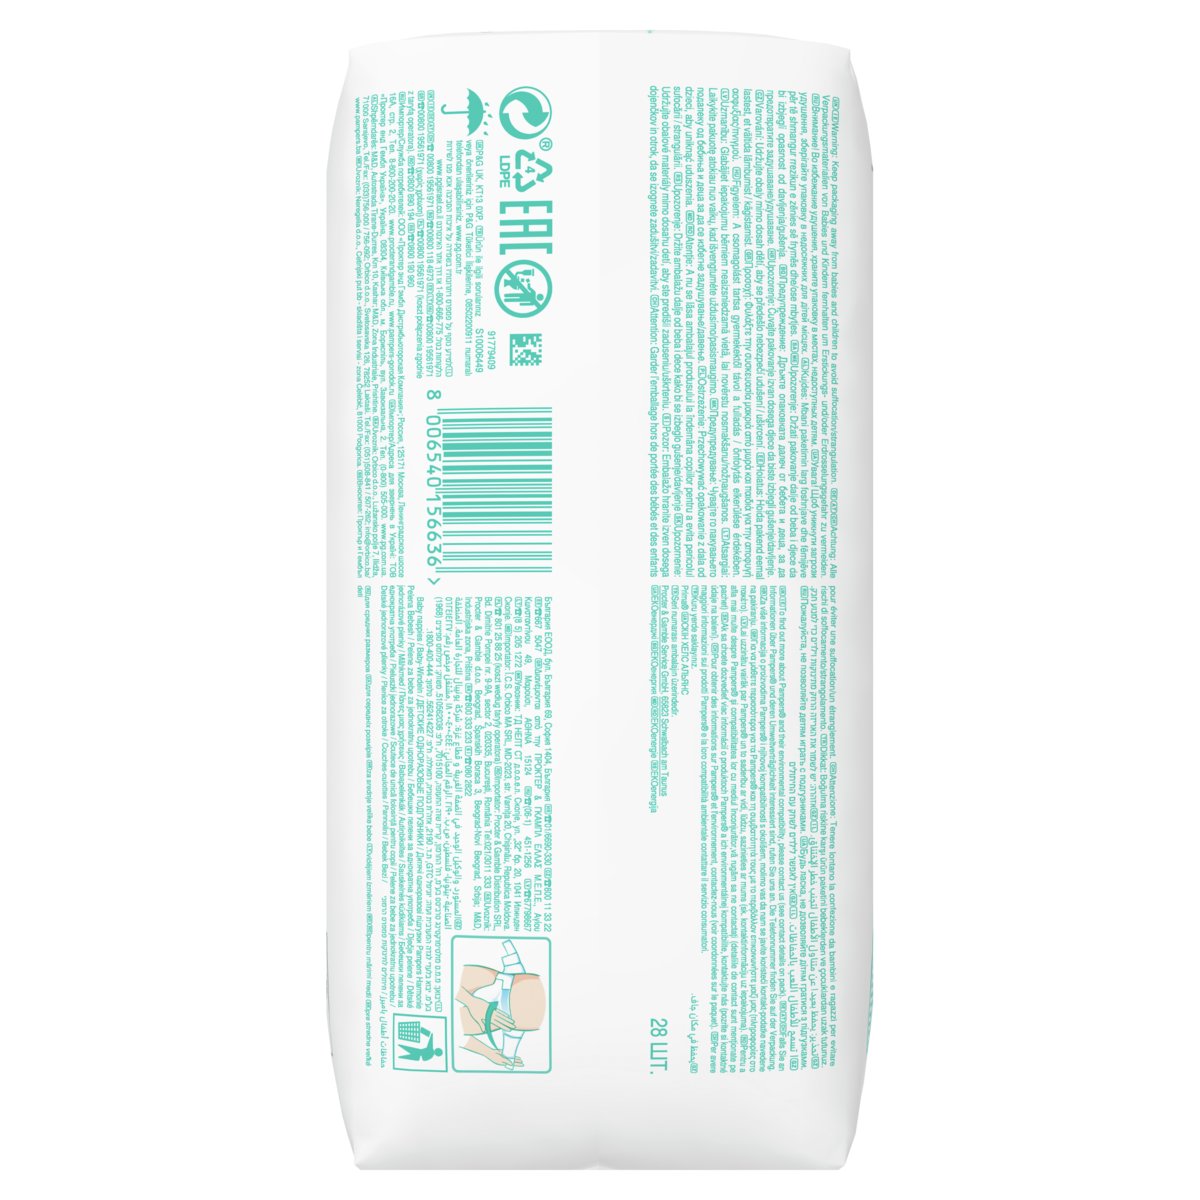 Pampers Harmonie (pure) diapers size 4, 9-14 kg, 28 pcs : : Baby  Products